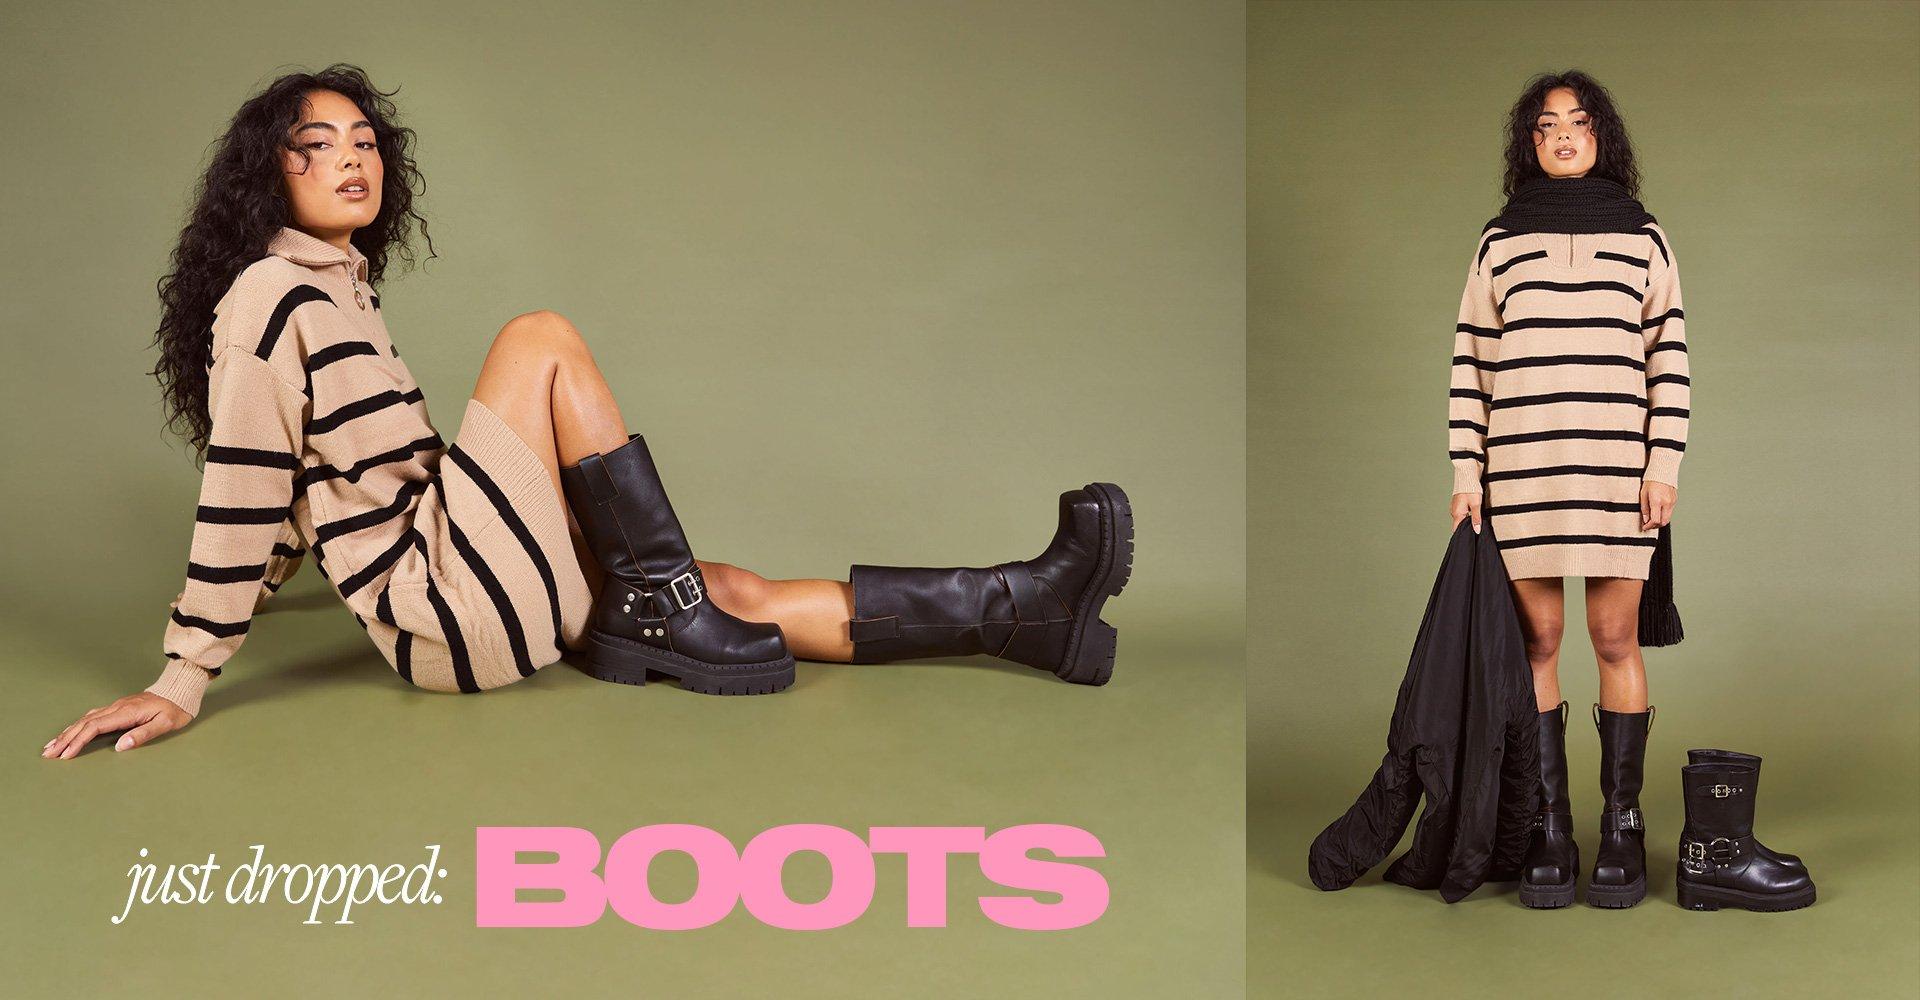 JUST DROPPED: BOOTS
									  